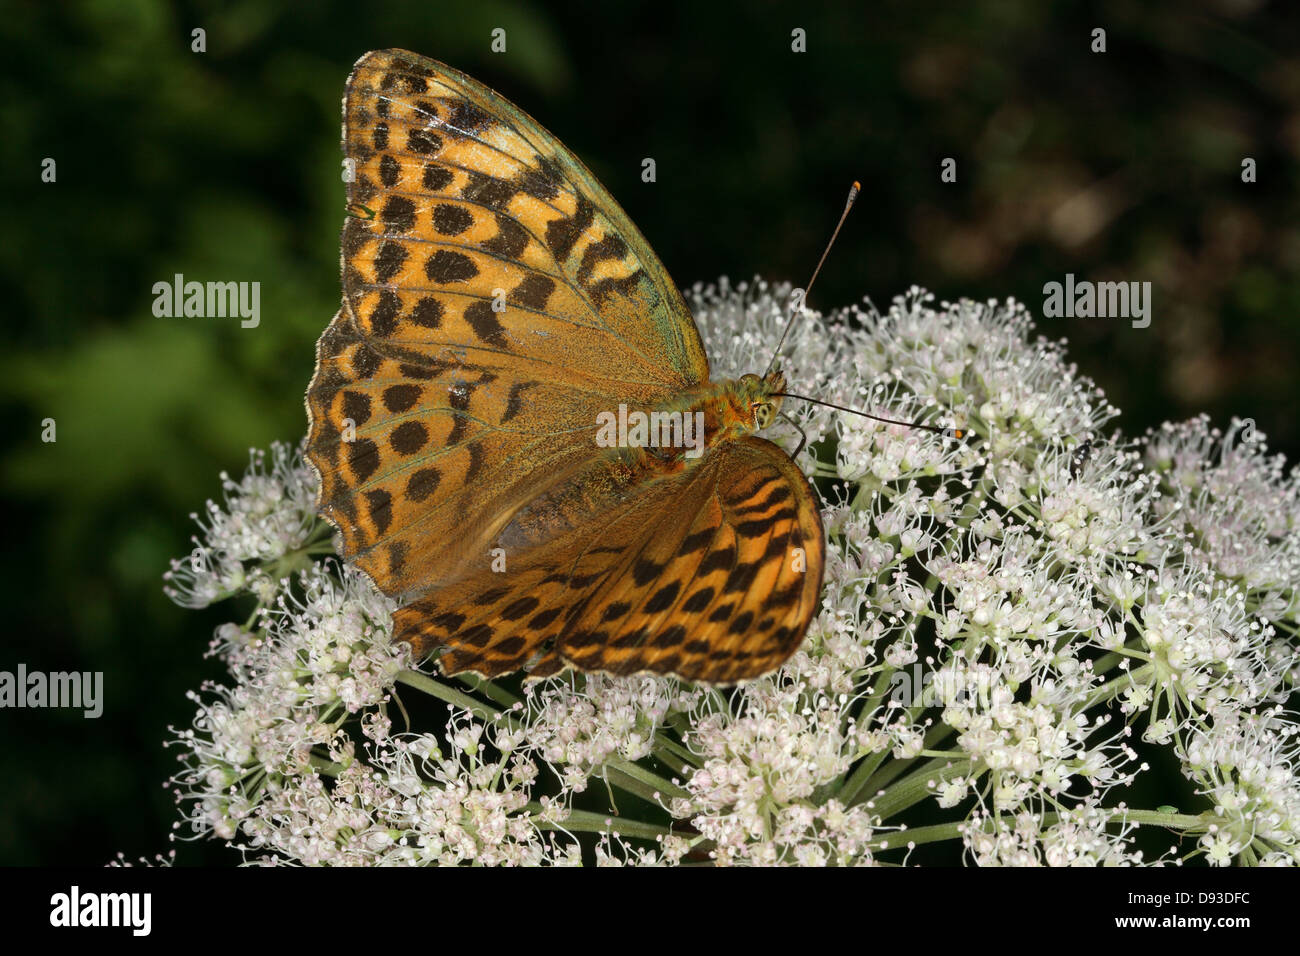 A butterfly, close-up. Stock Photo